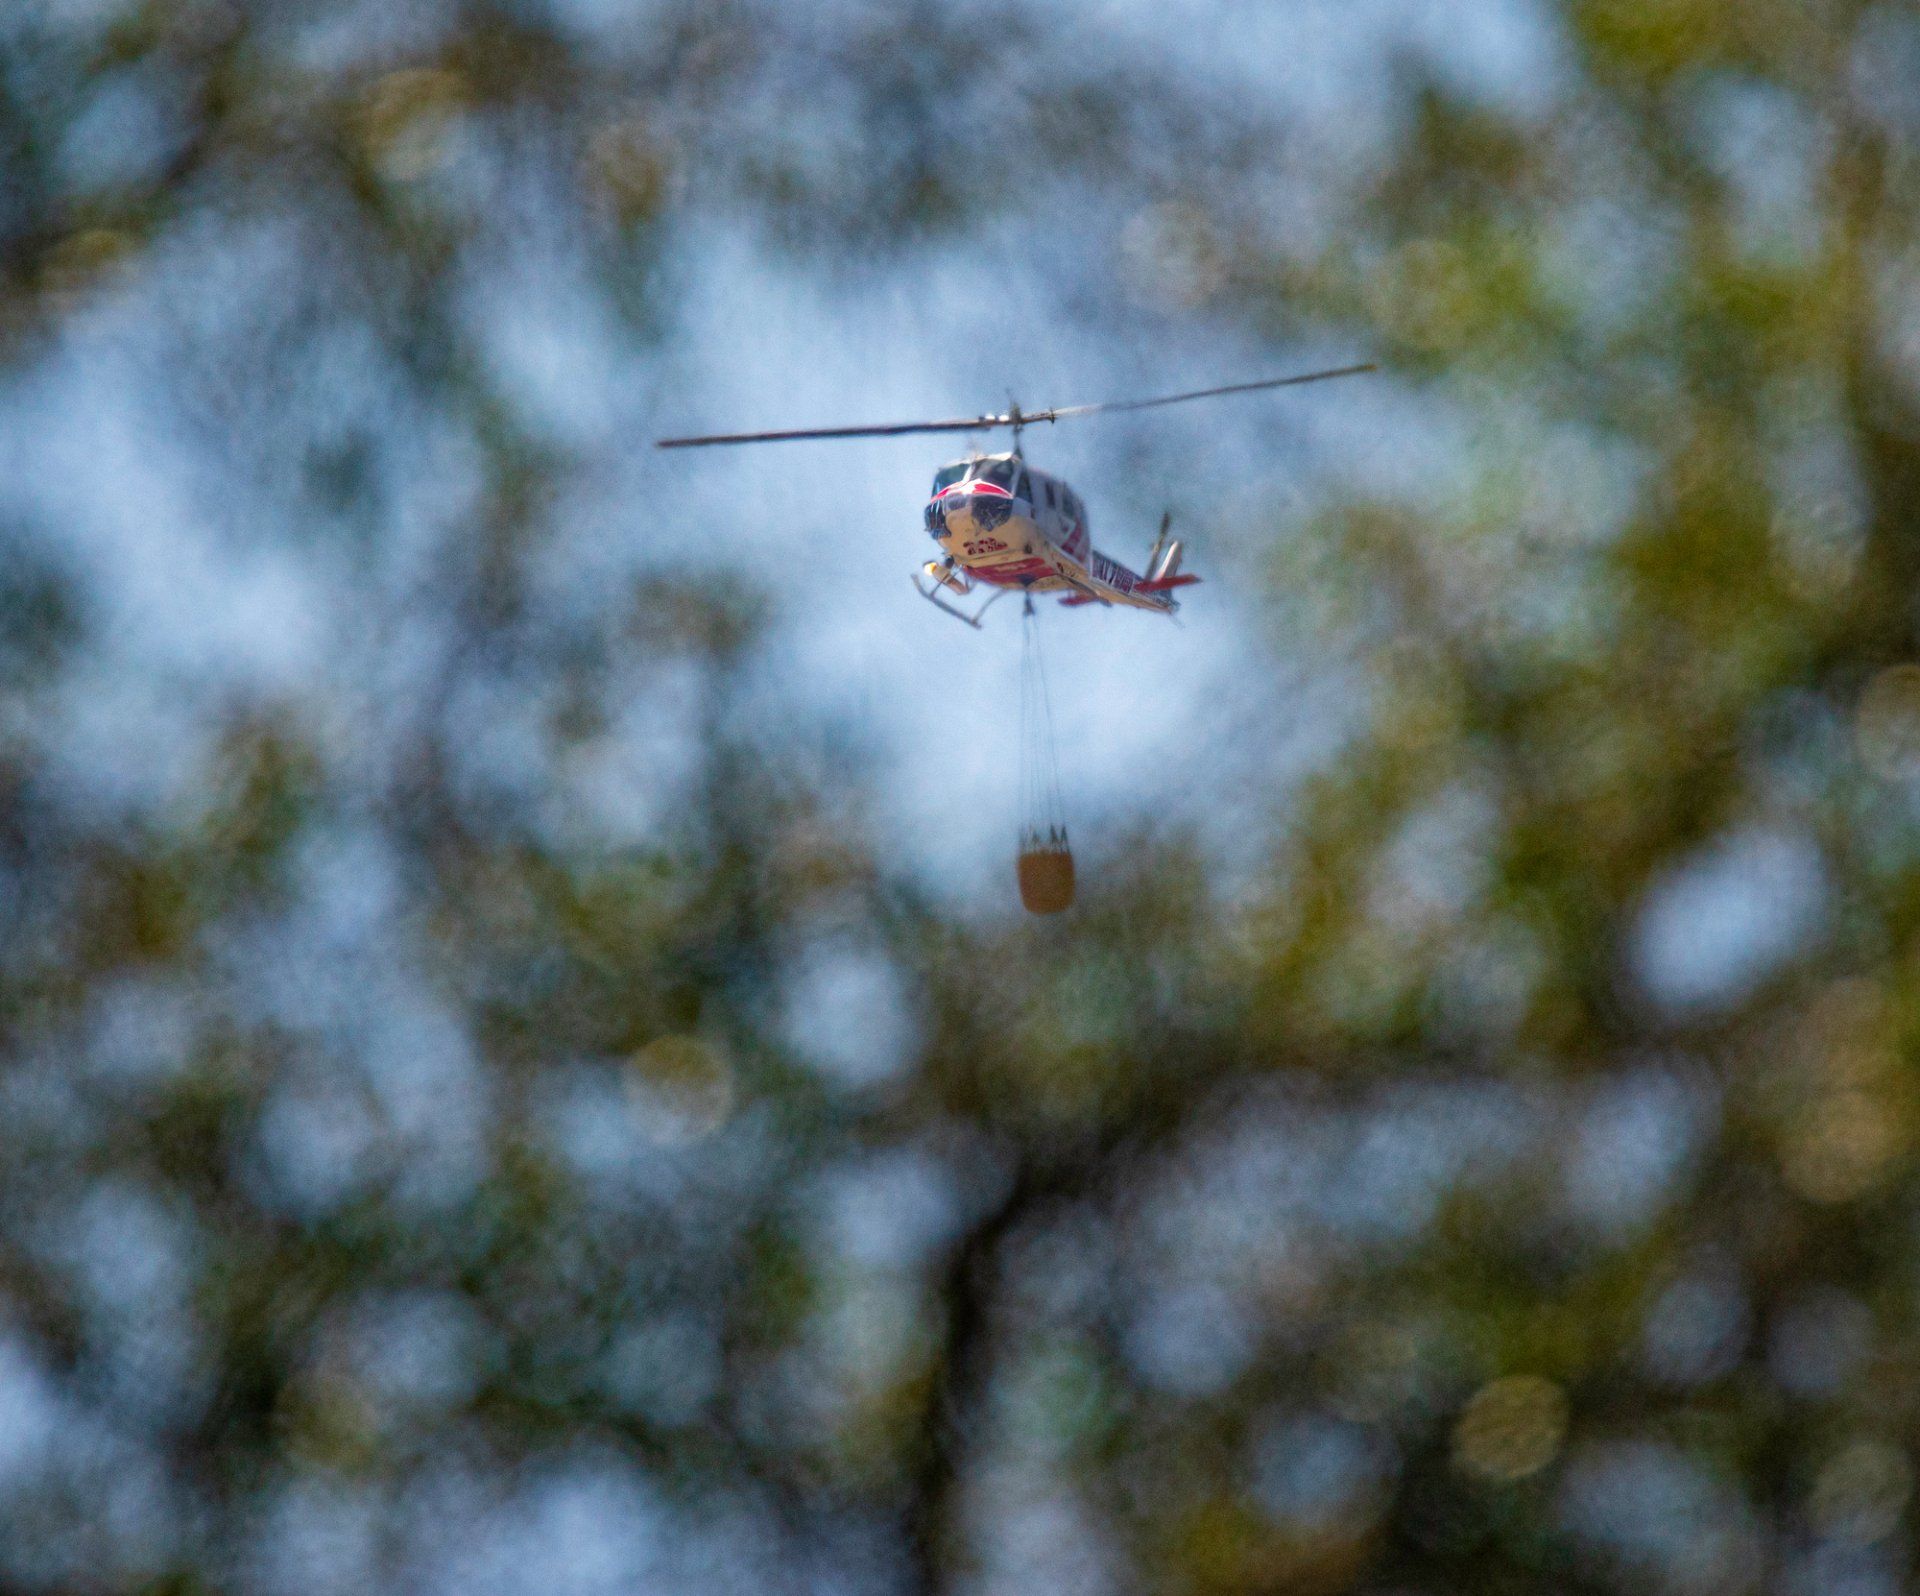 CalFire's Boggs Mountain Helitack moves in for a drop on a fire along Berryessa-Knoxville Road in northern Napa County, California.